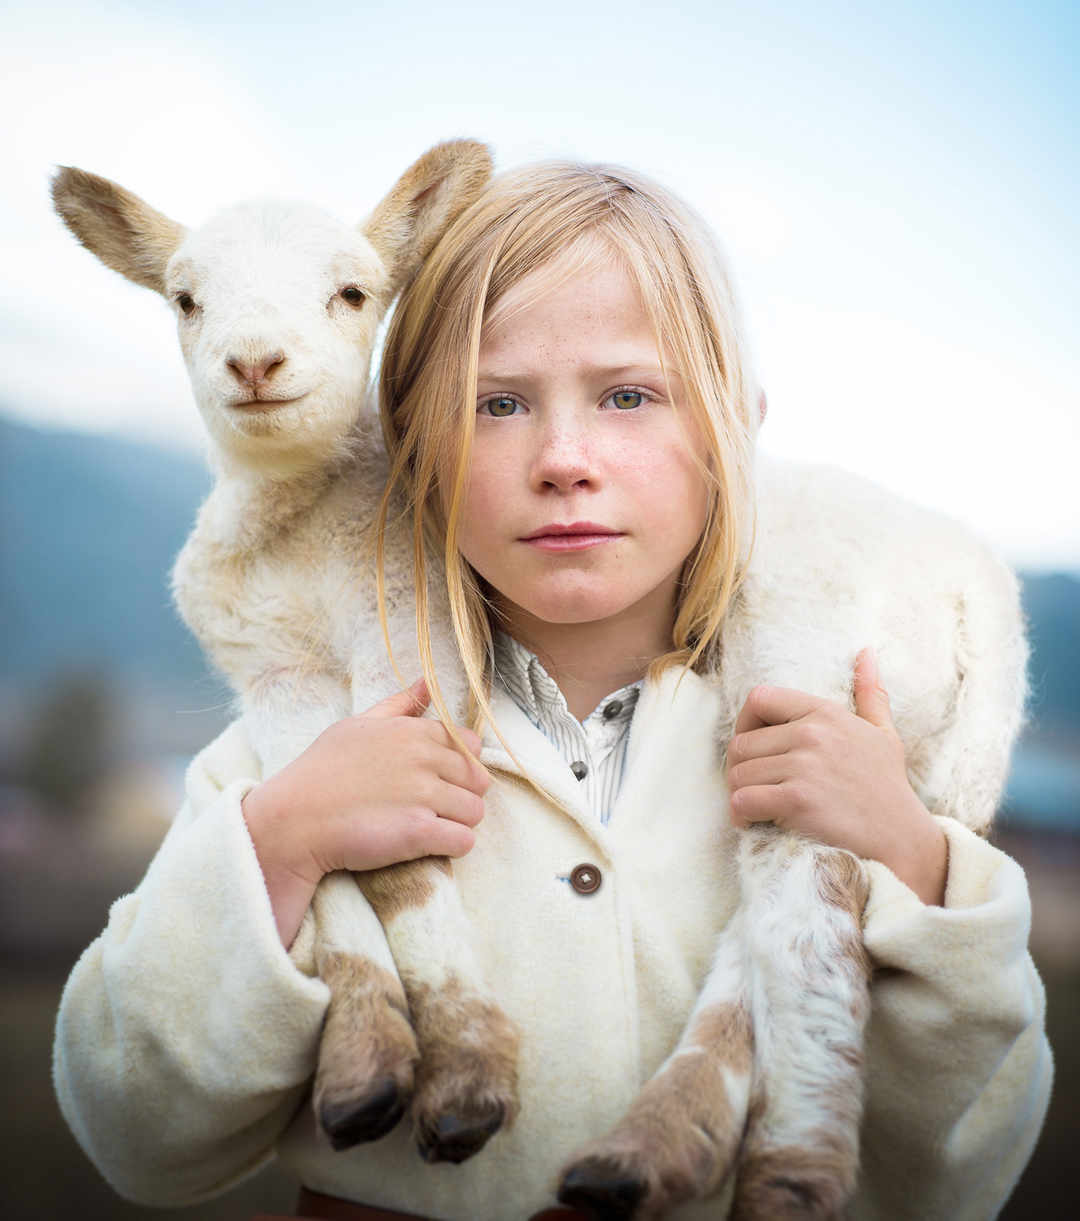 Farm life is more than a lifestyle for many generations of Colorado families. This portrait captures the spirit of loving life on a farm even from a young age.